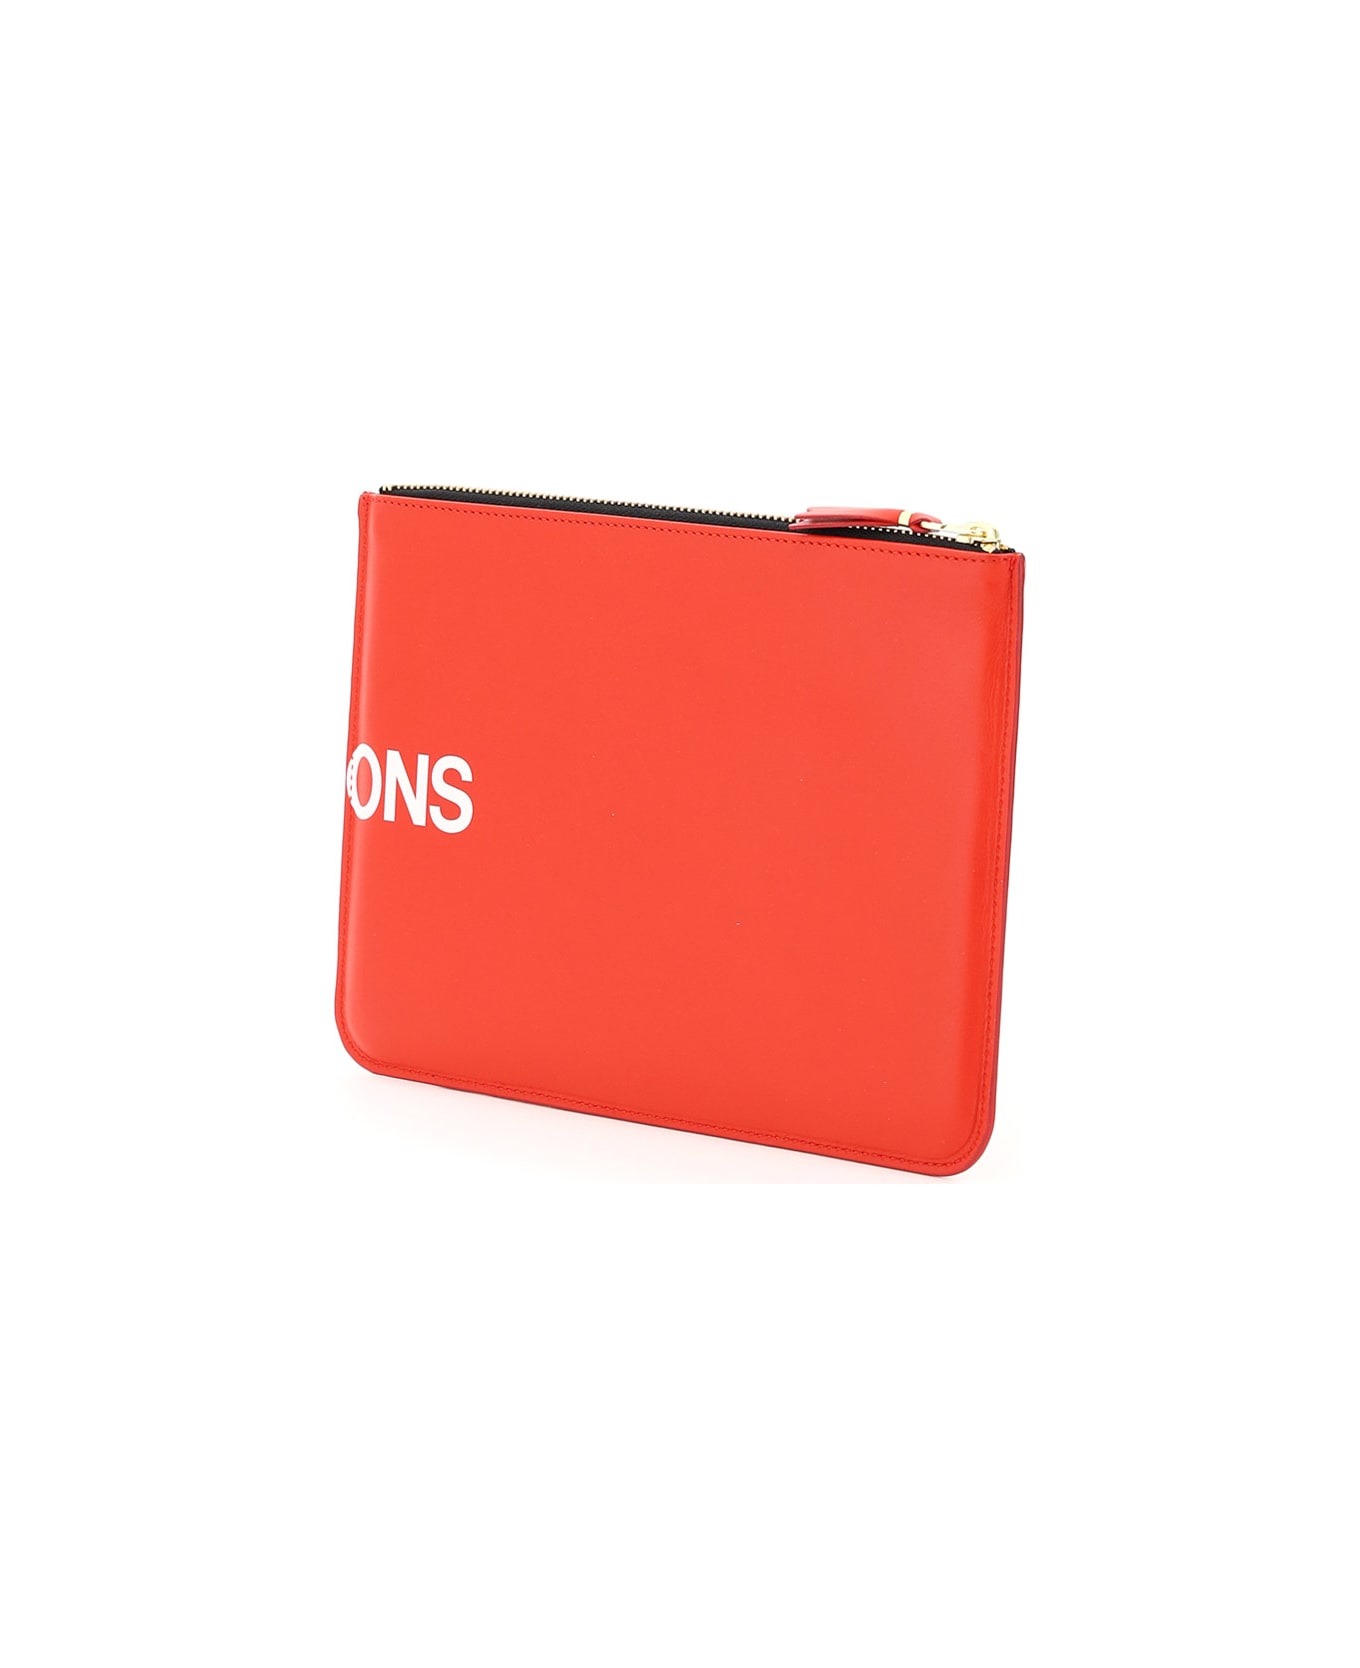 Comme des Garçons Wallet Leather Pouch With Logo - RED (Red) バッグ